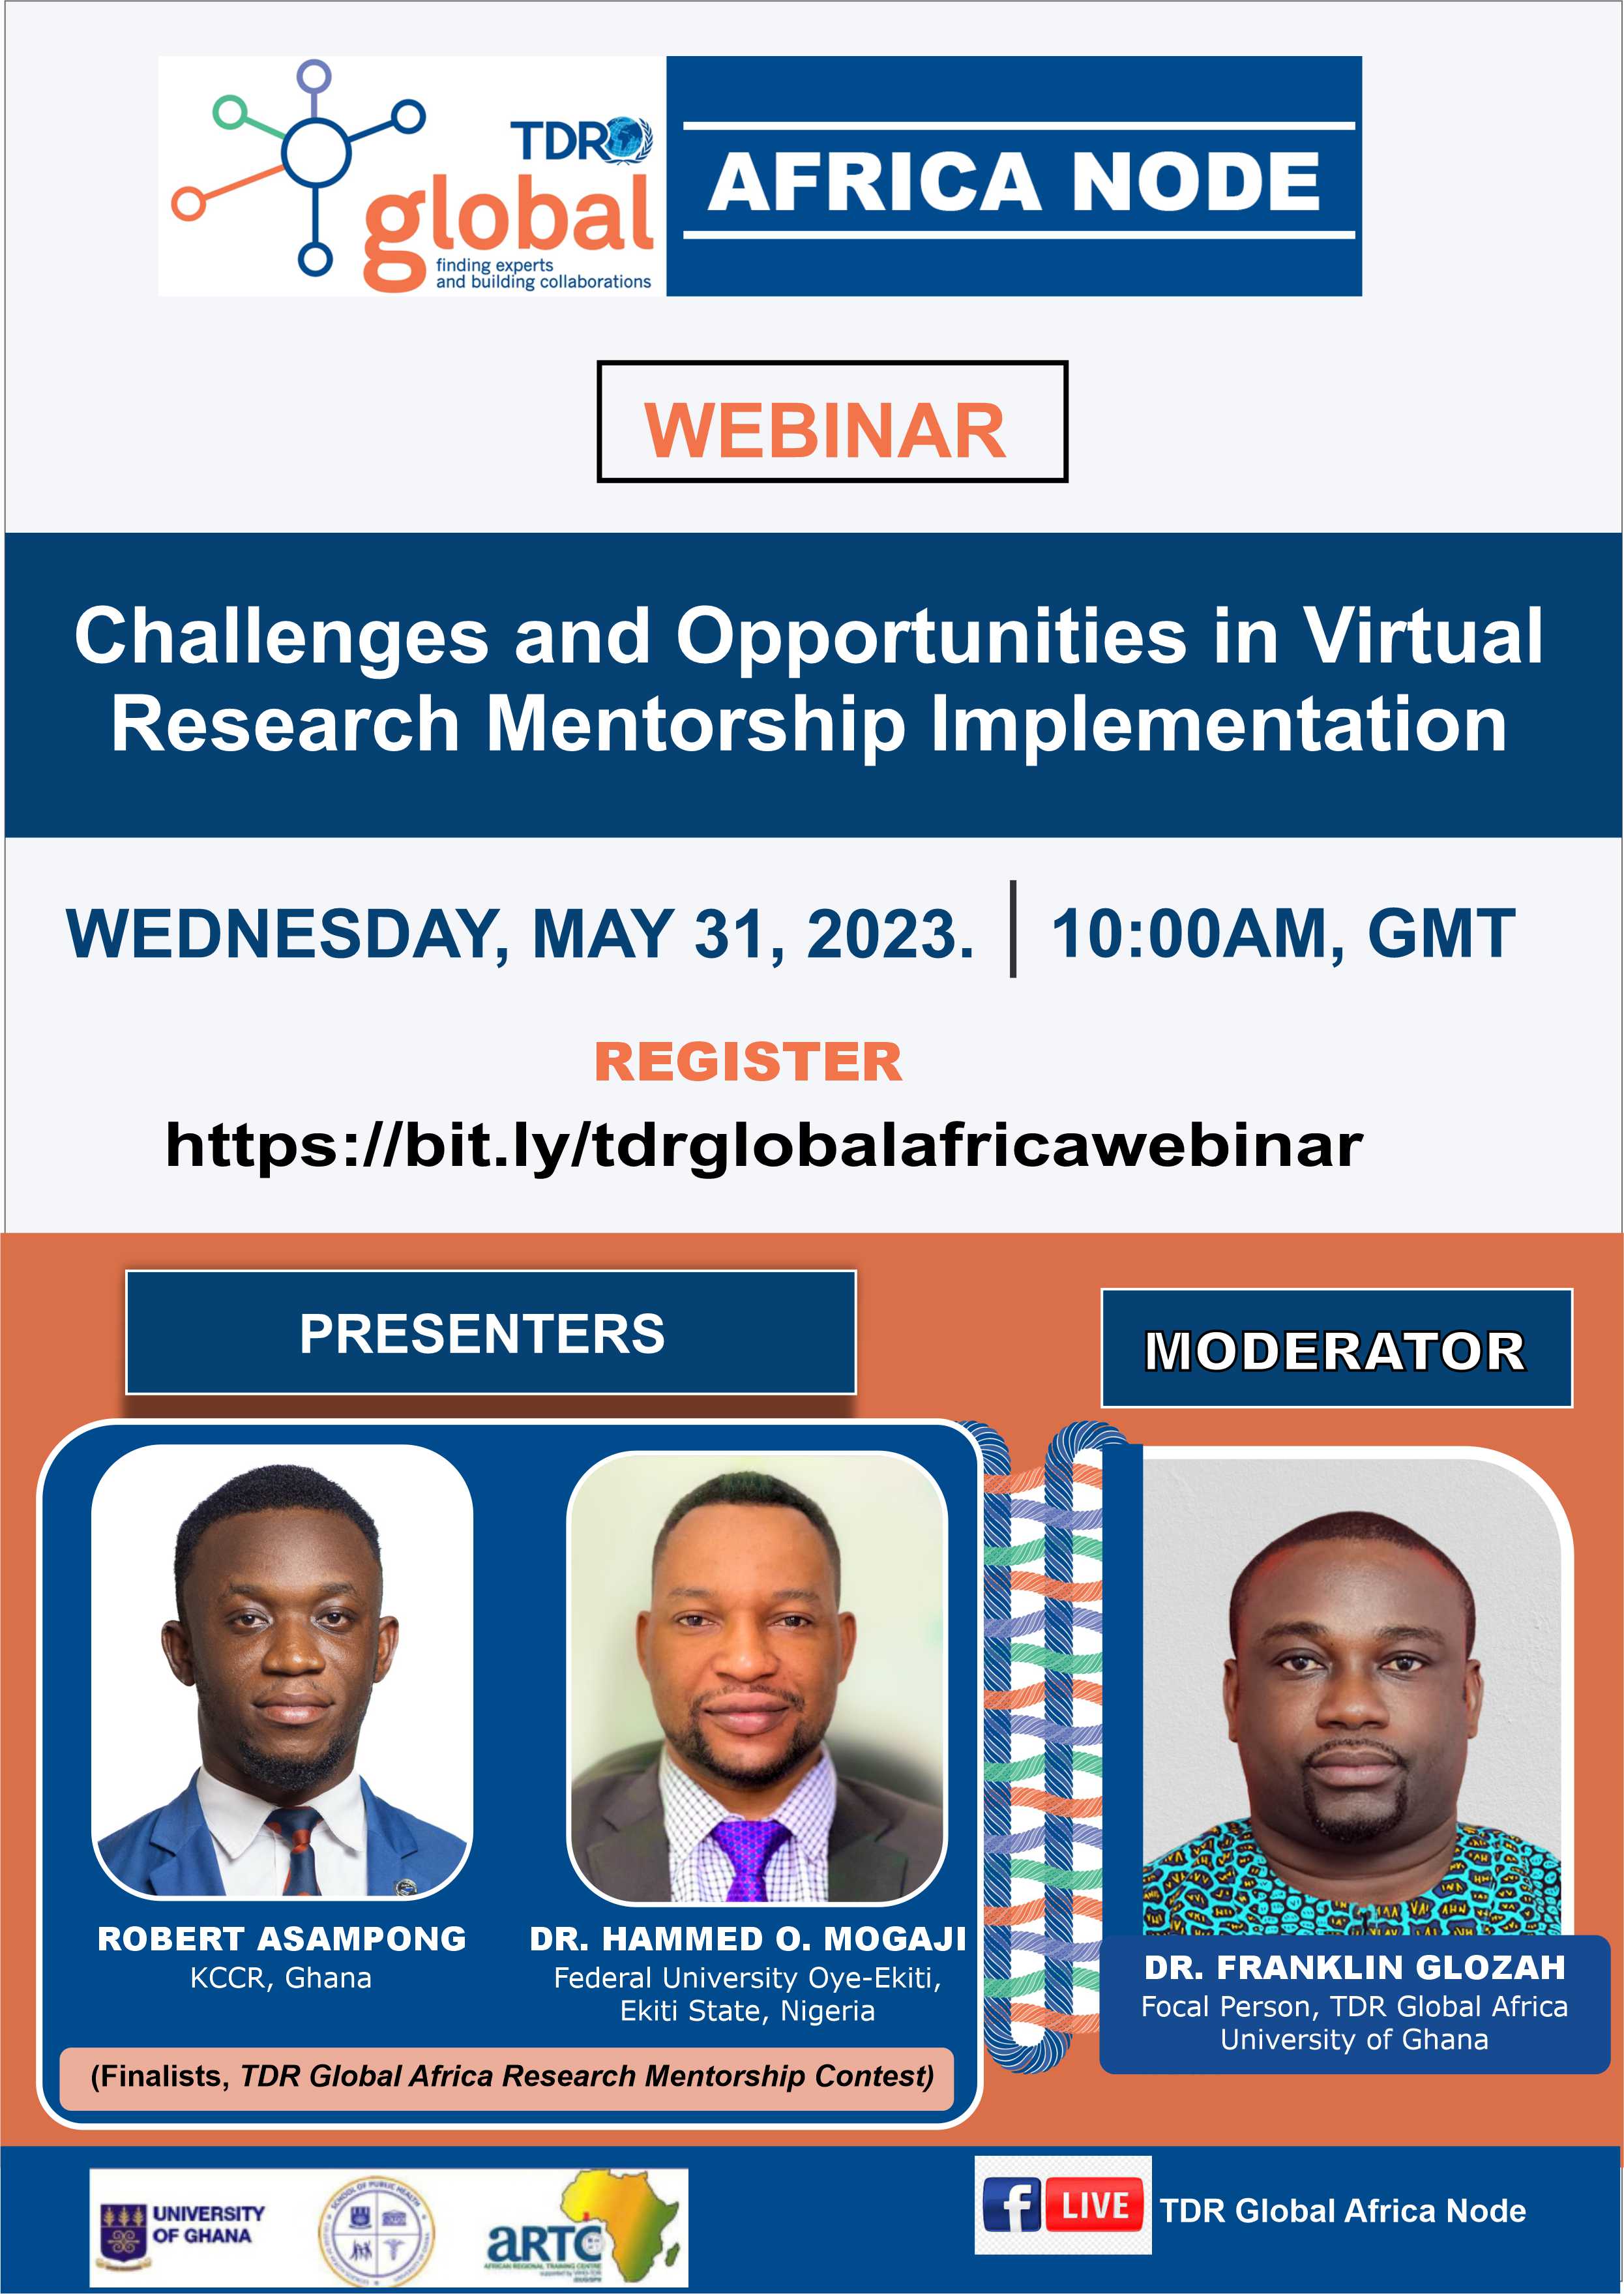 Webinar: Challenges and Opportunities in Virtual Research Mentorship Implementation